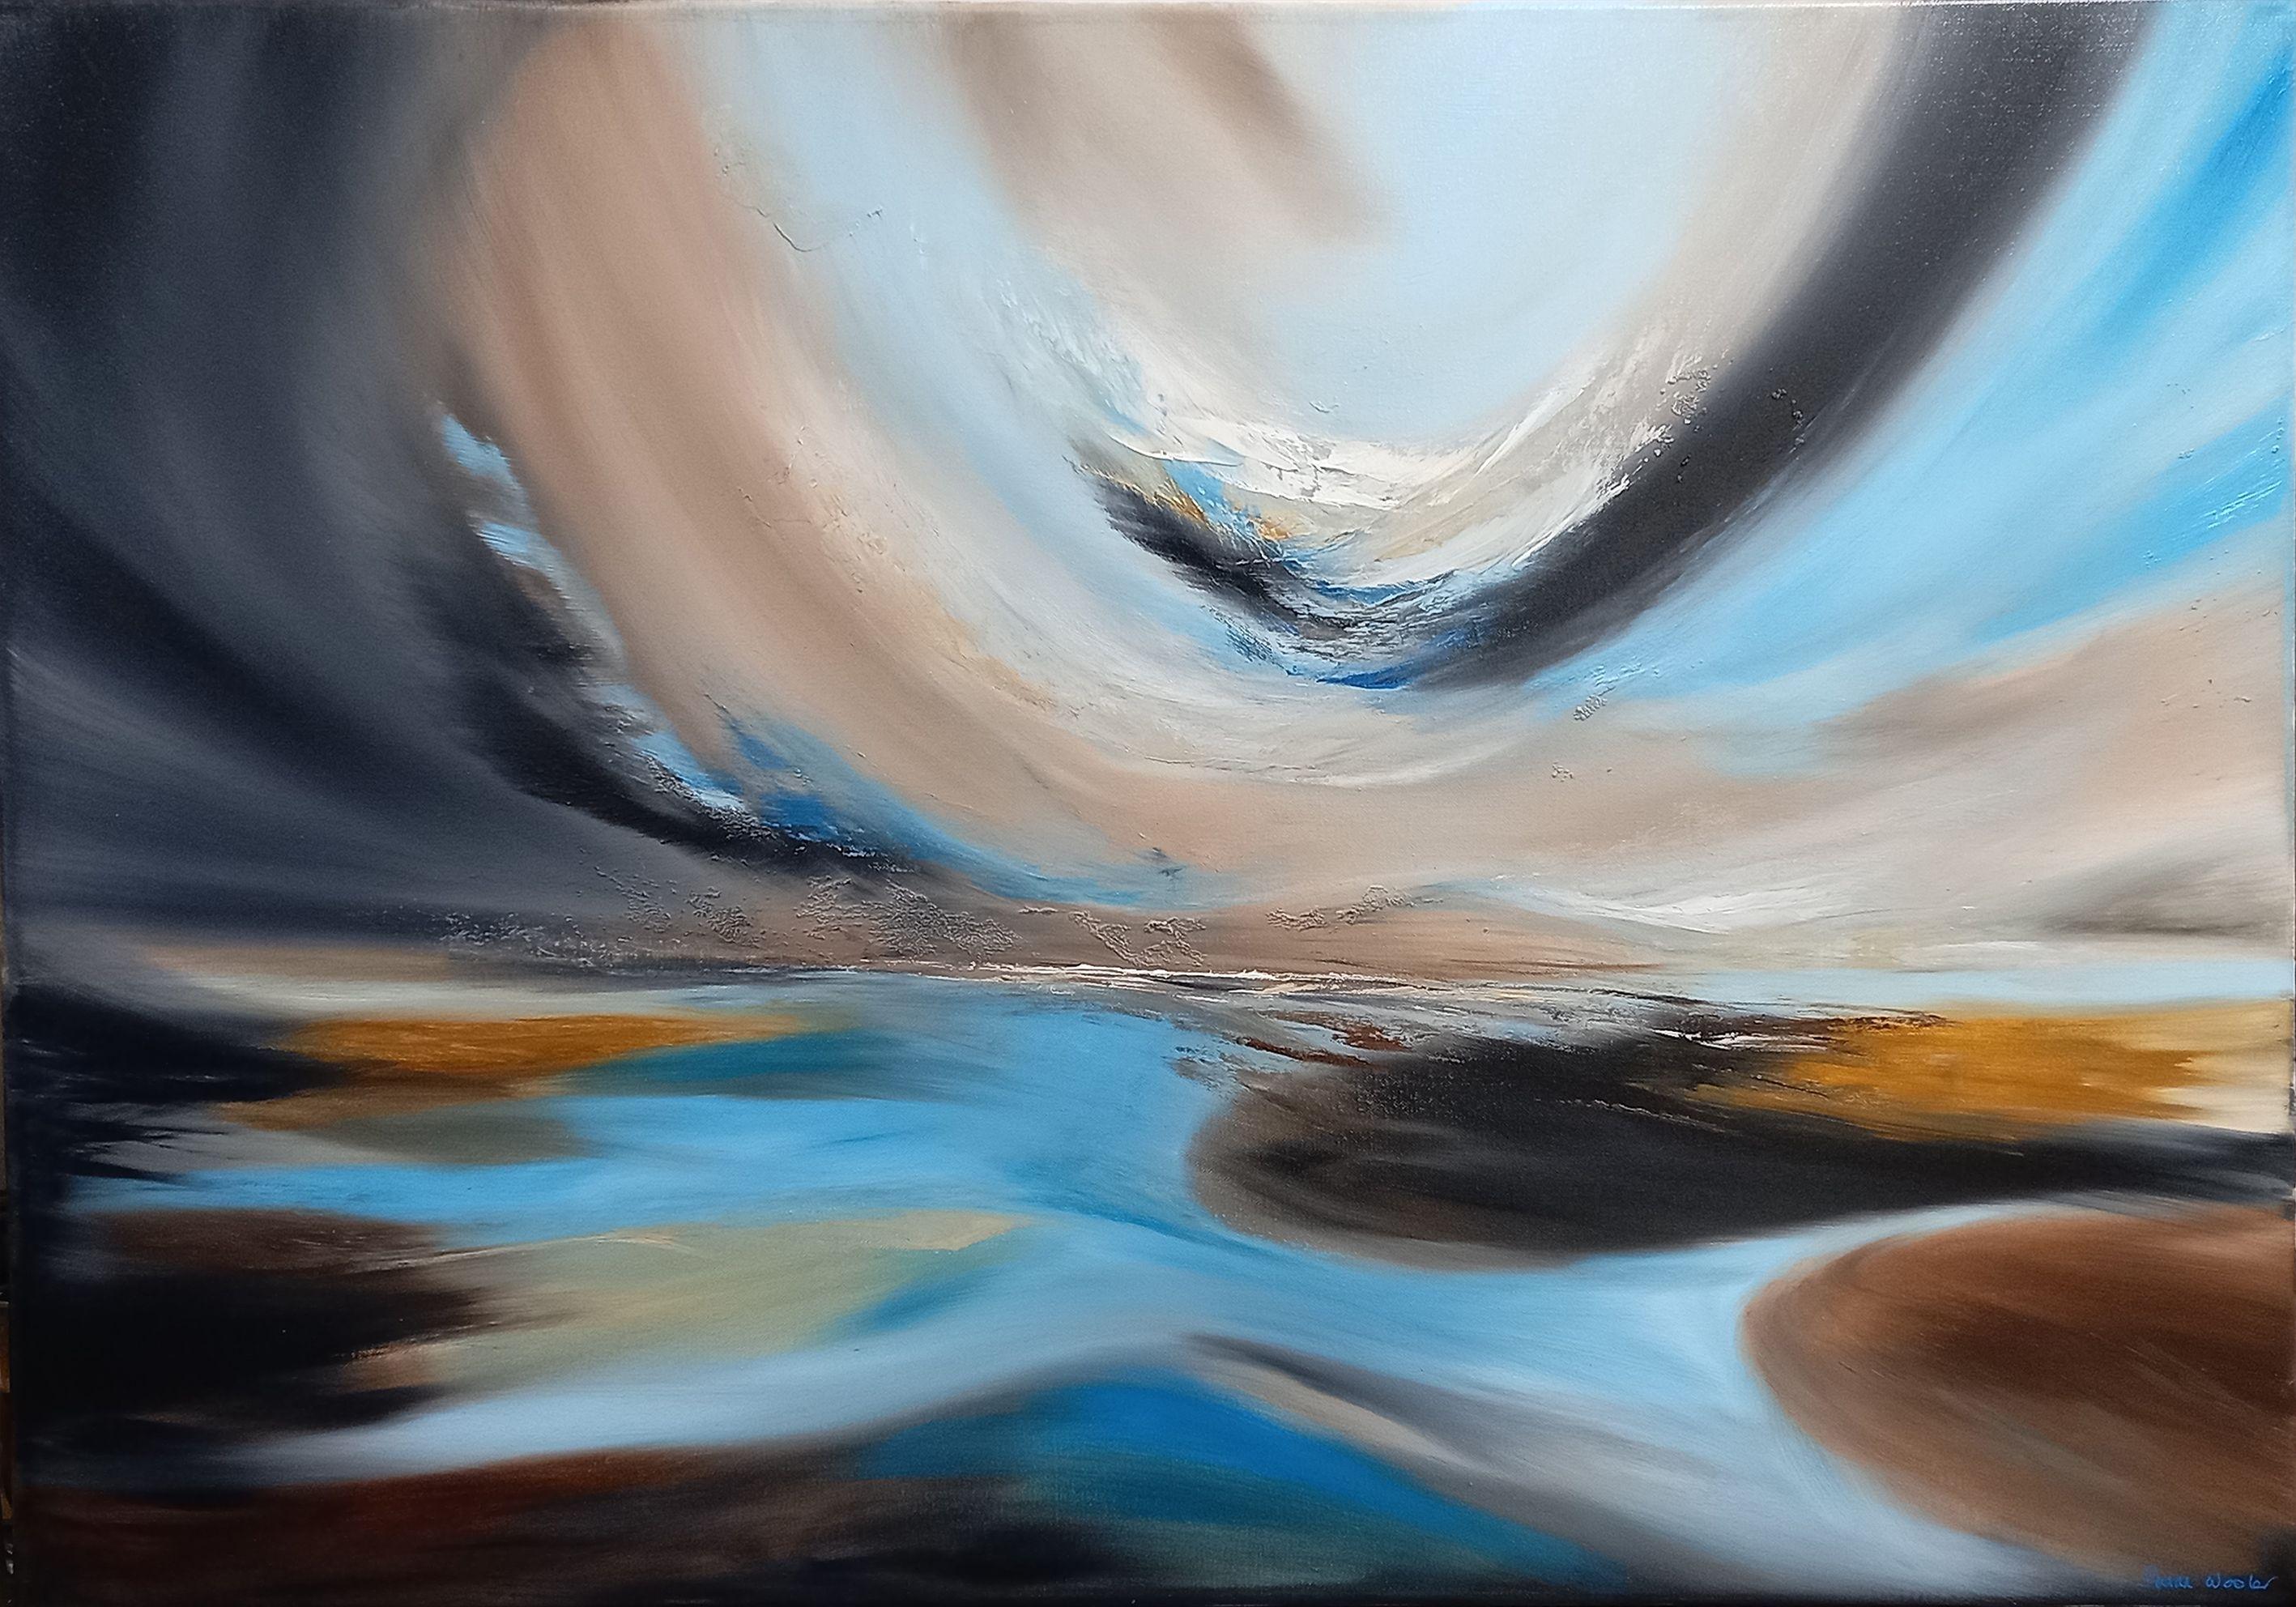 XXL Solace of Dawn 100 x 70 cm    Size 100 x 70 cms  Professional Gallery Wrapped Canvas  Edges Painted Black  Ready to Hang  Varnished for protection  Room for reference    Signed, dated and titled. Original artwork with signed Certificate of